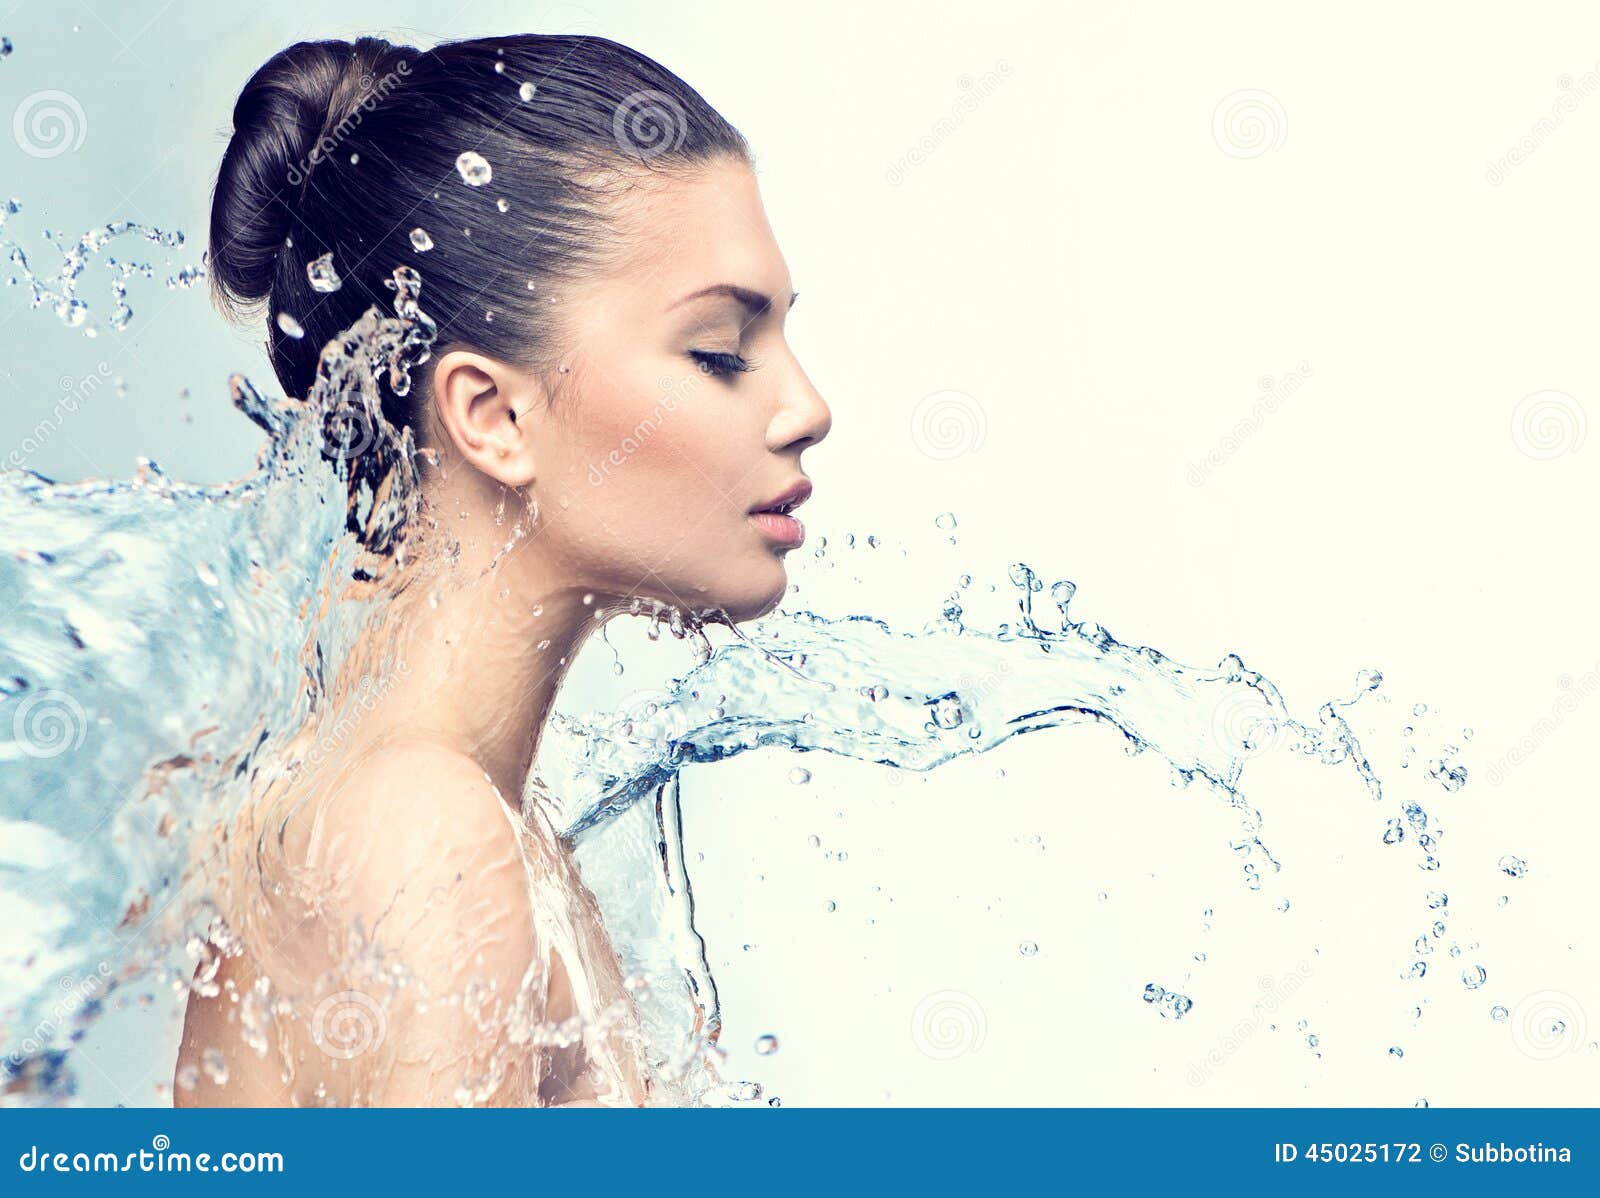 beautiful model woman with splashes of water